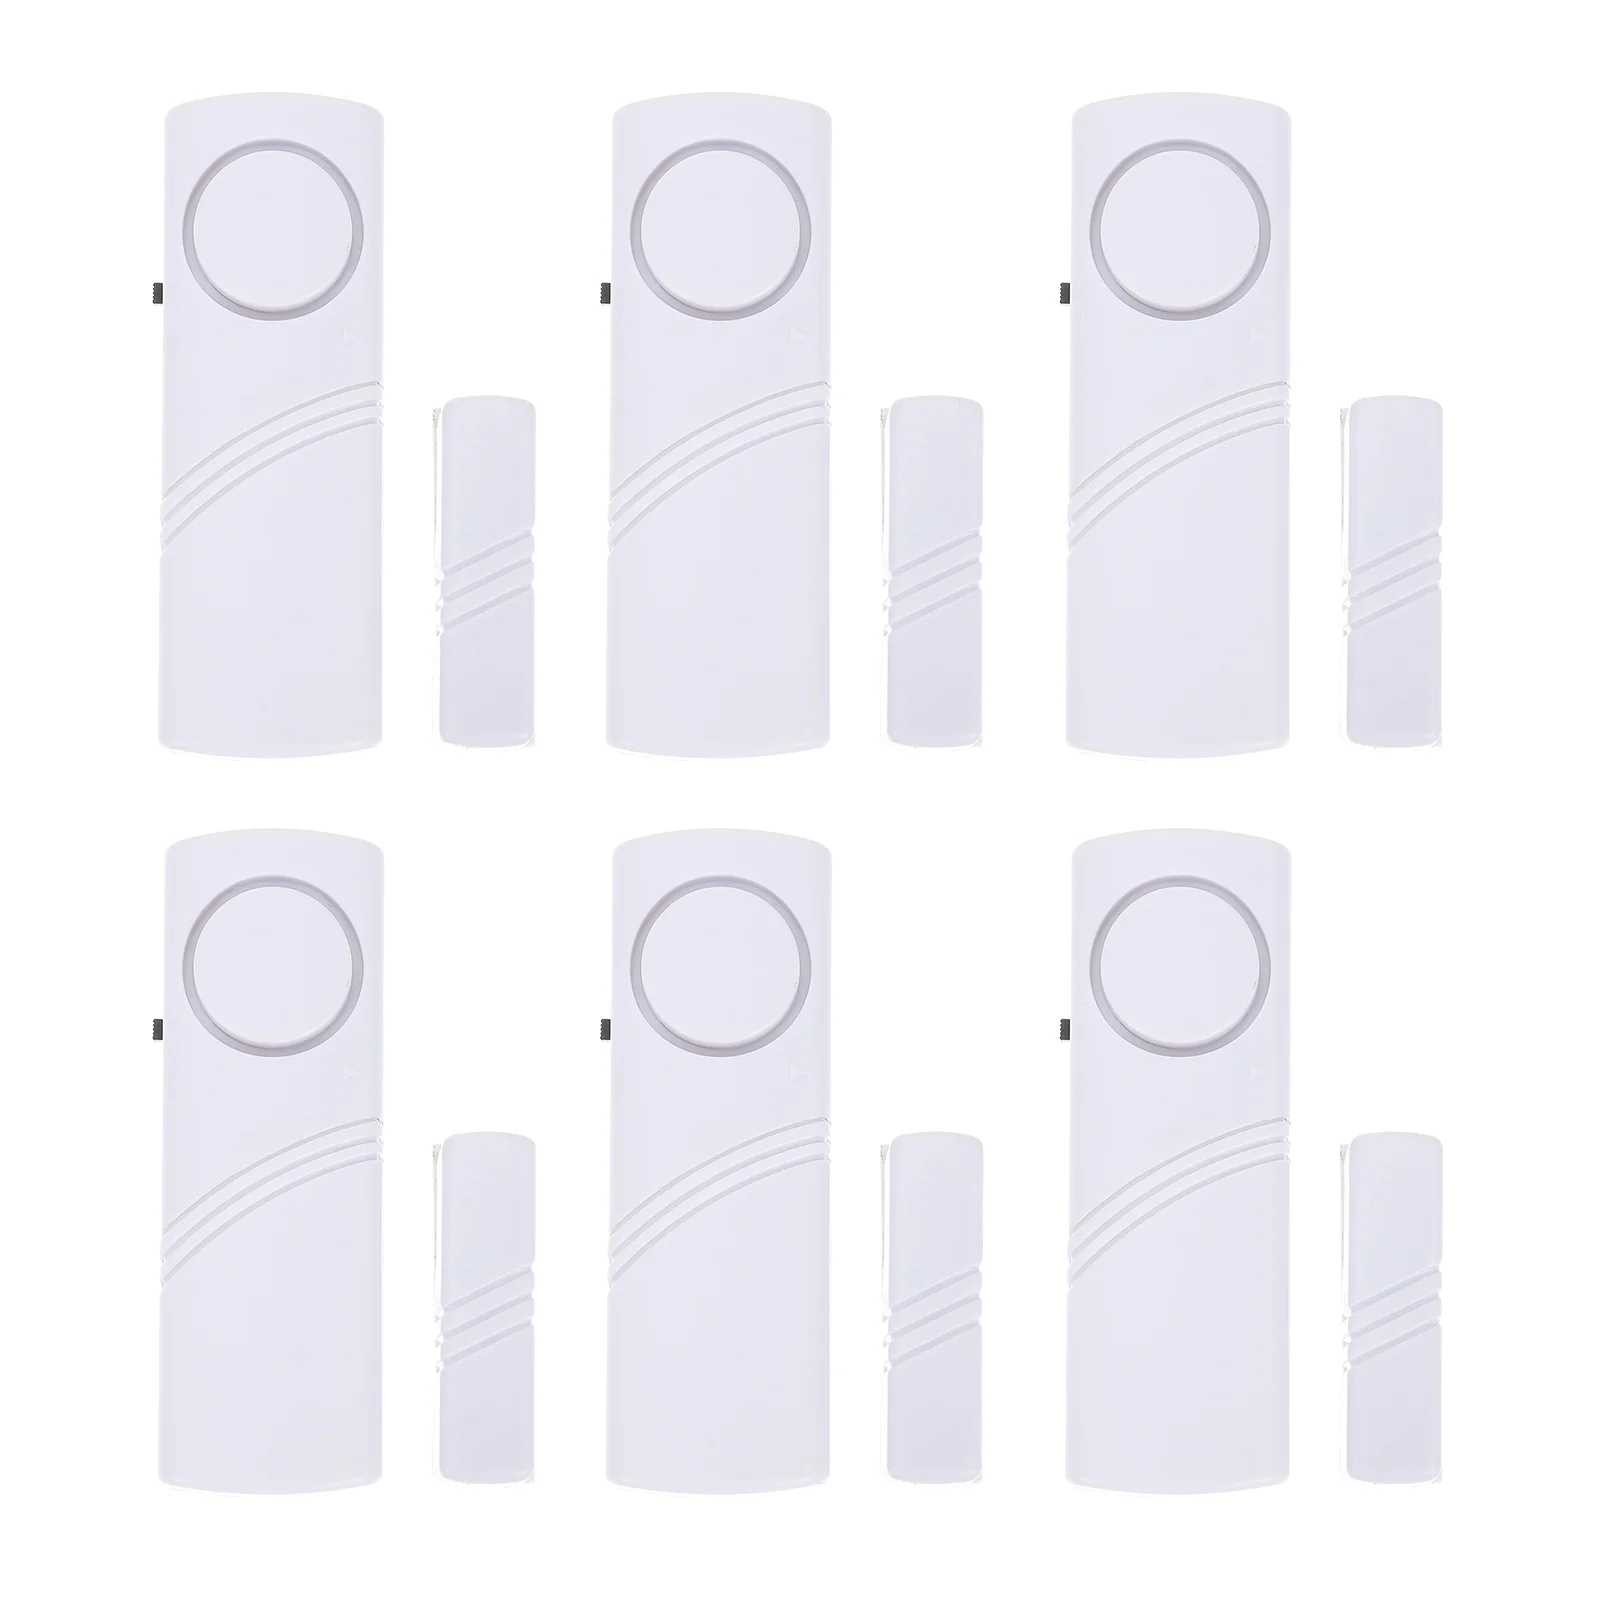 

6 Pcs Door Window Alarm Alarms Magnets Home Siren Wireless Compact Household Security Abs Sounds